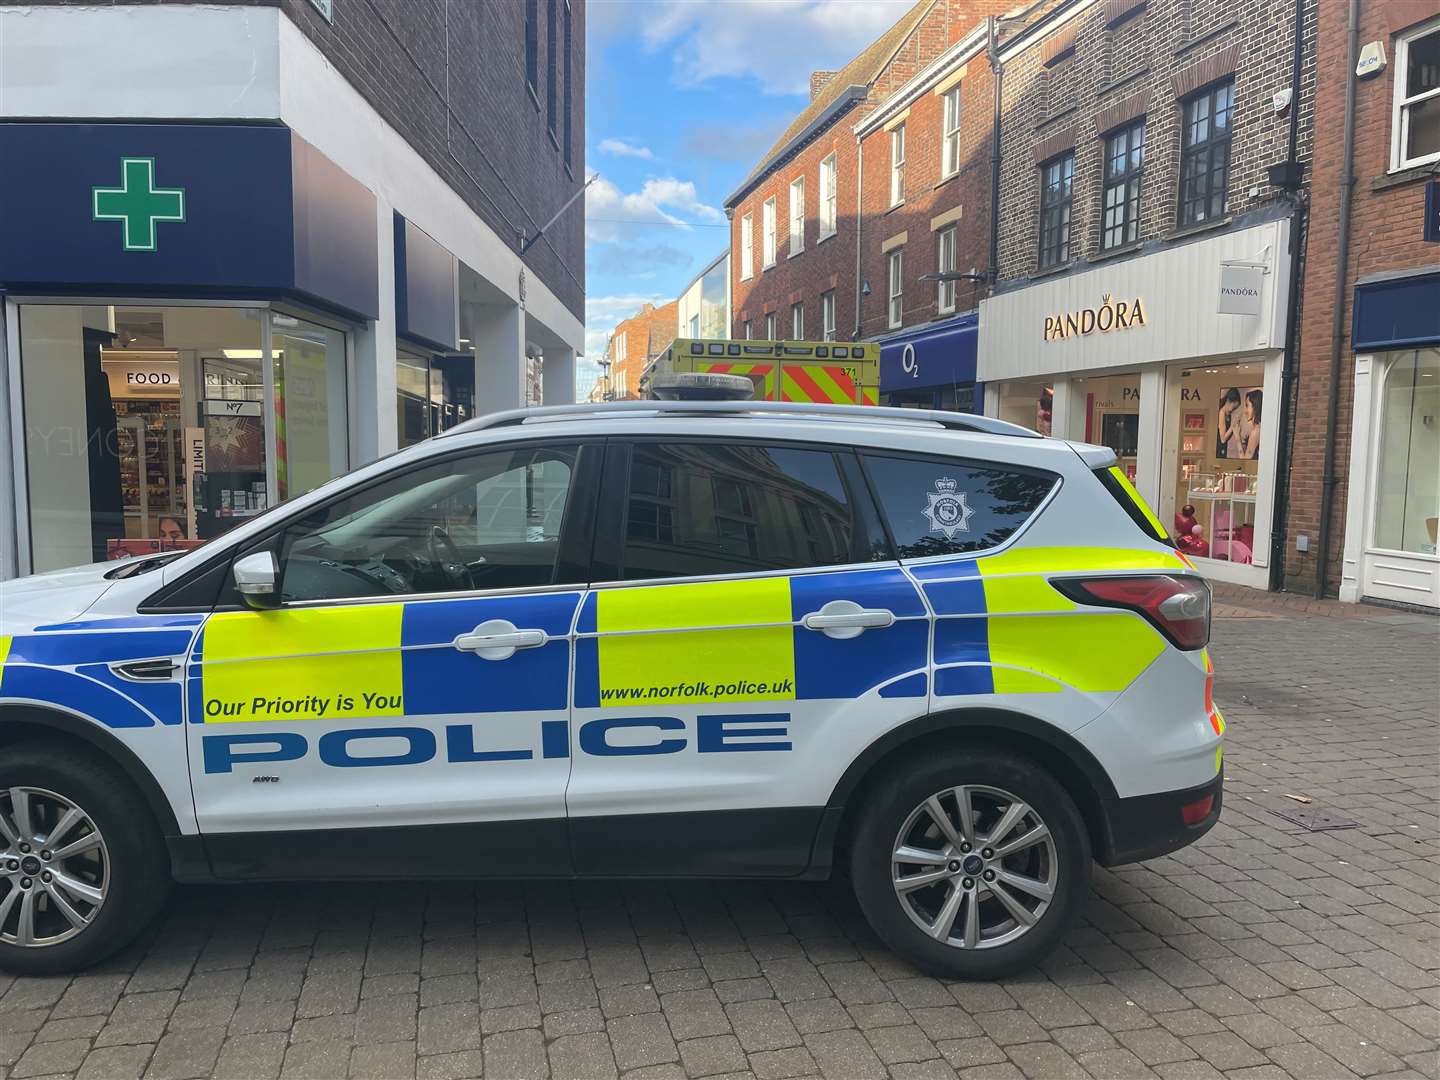 Police and ambulance were called to High Street in Lynn to assist with a medical emergency